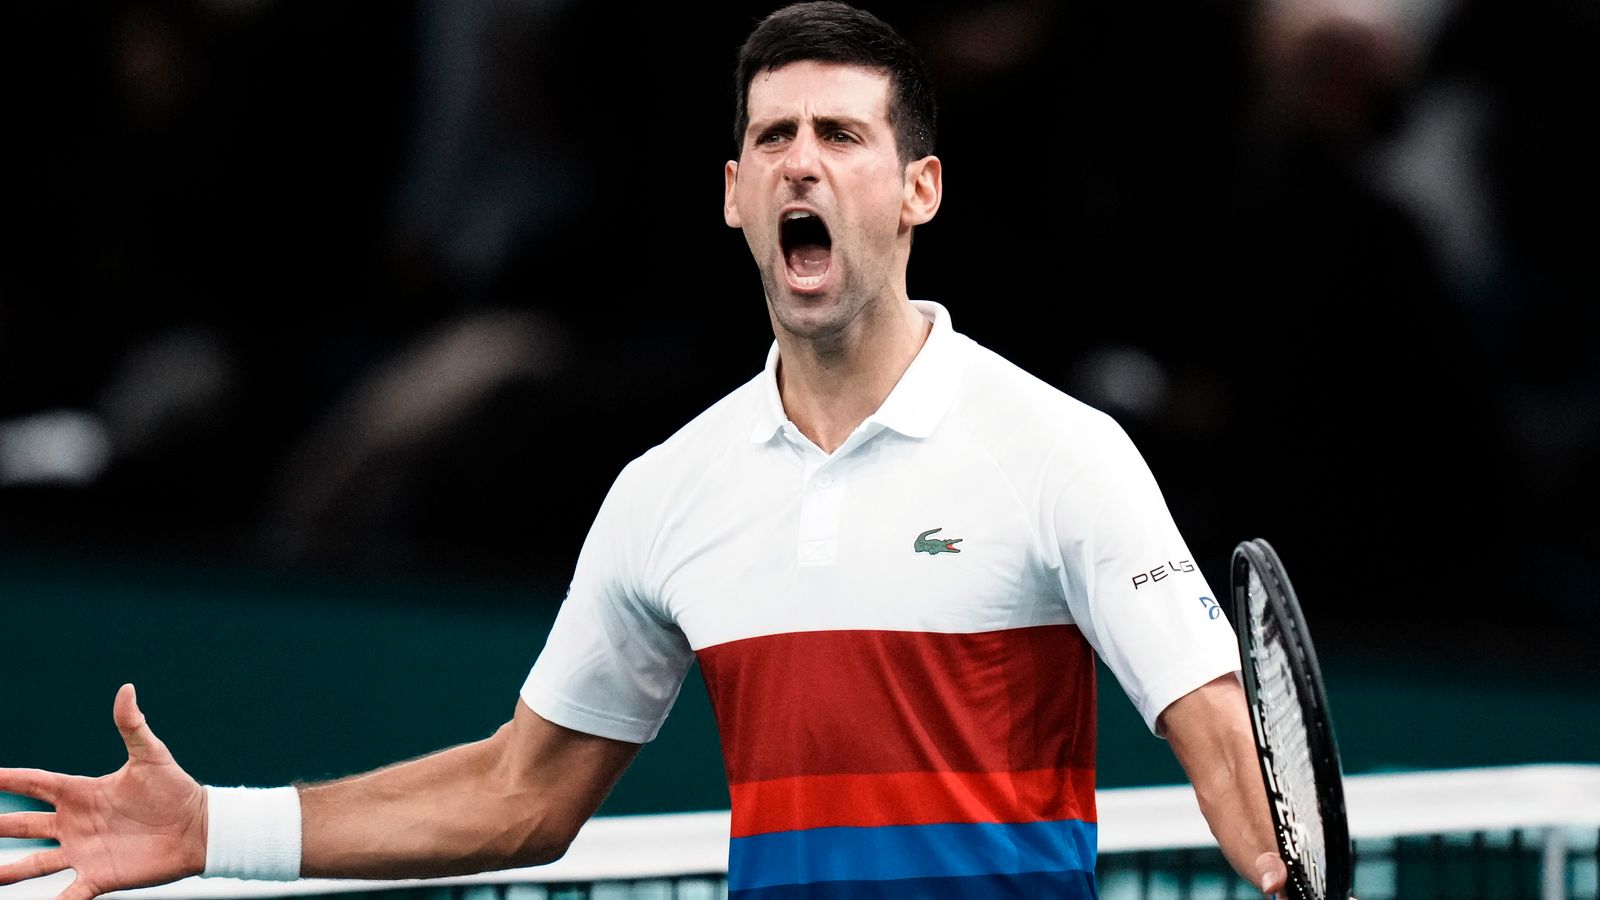 Novak Djokovic told ‘you must comply’ with ‘strict border requirements’ despite Covid-19 vaccination exemption for Australian Open